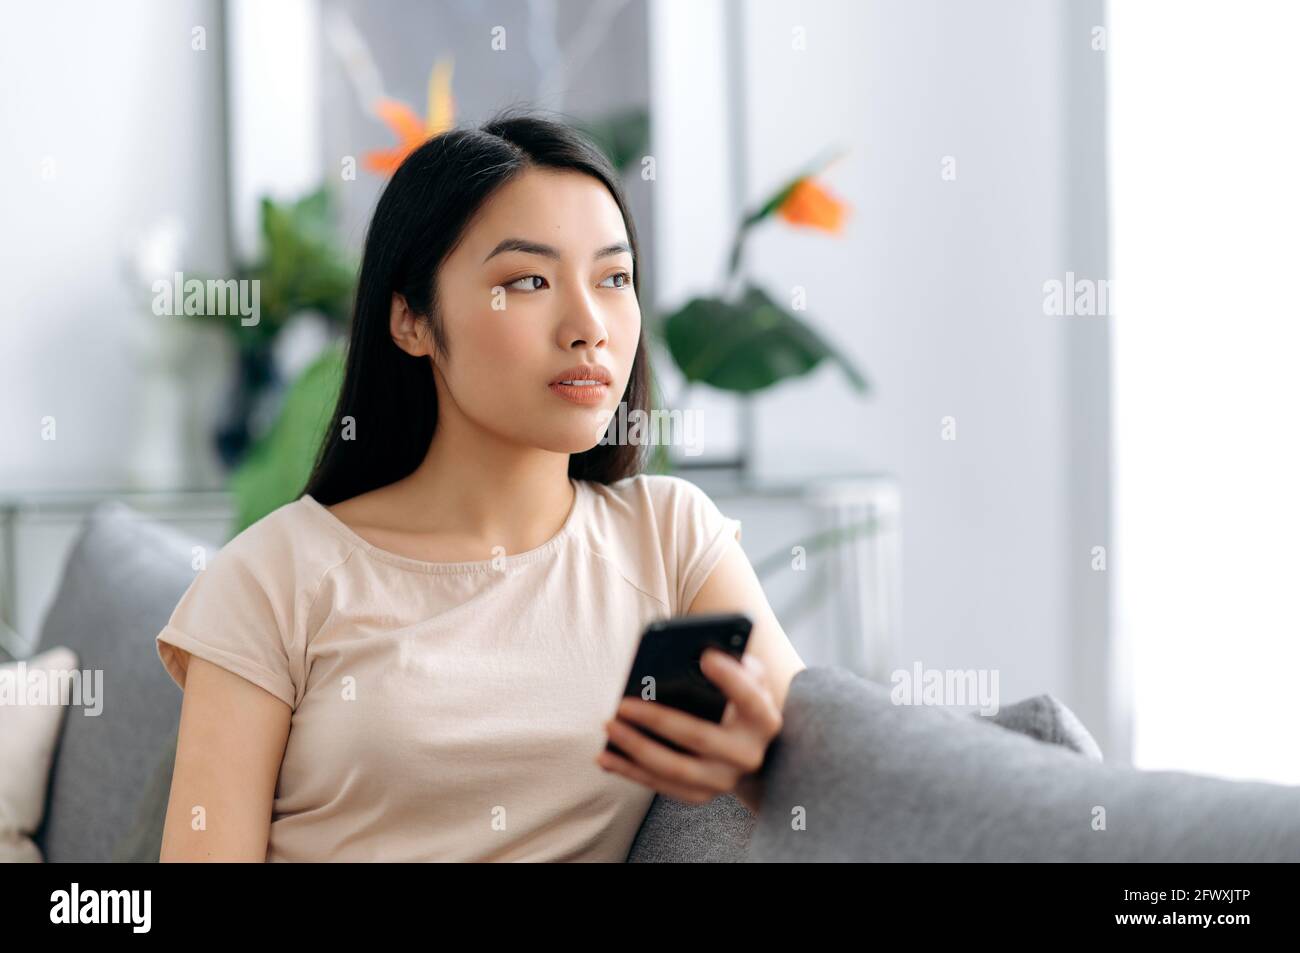 https://c8.alamy.com/comp/2FWXJTP/pensive-young-asian-beautiful-woman-uses-her-mobile-phone-while-sitting-on-the-sofa-in-casual-clothes-browses-the-internet-and-social-networks-texting-with-friends-or-family-looks-away-thoughtfully-2FWXJTP.jpg